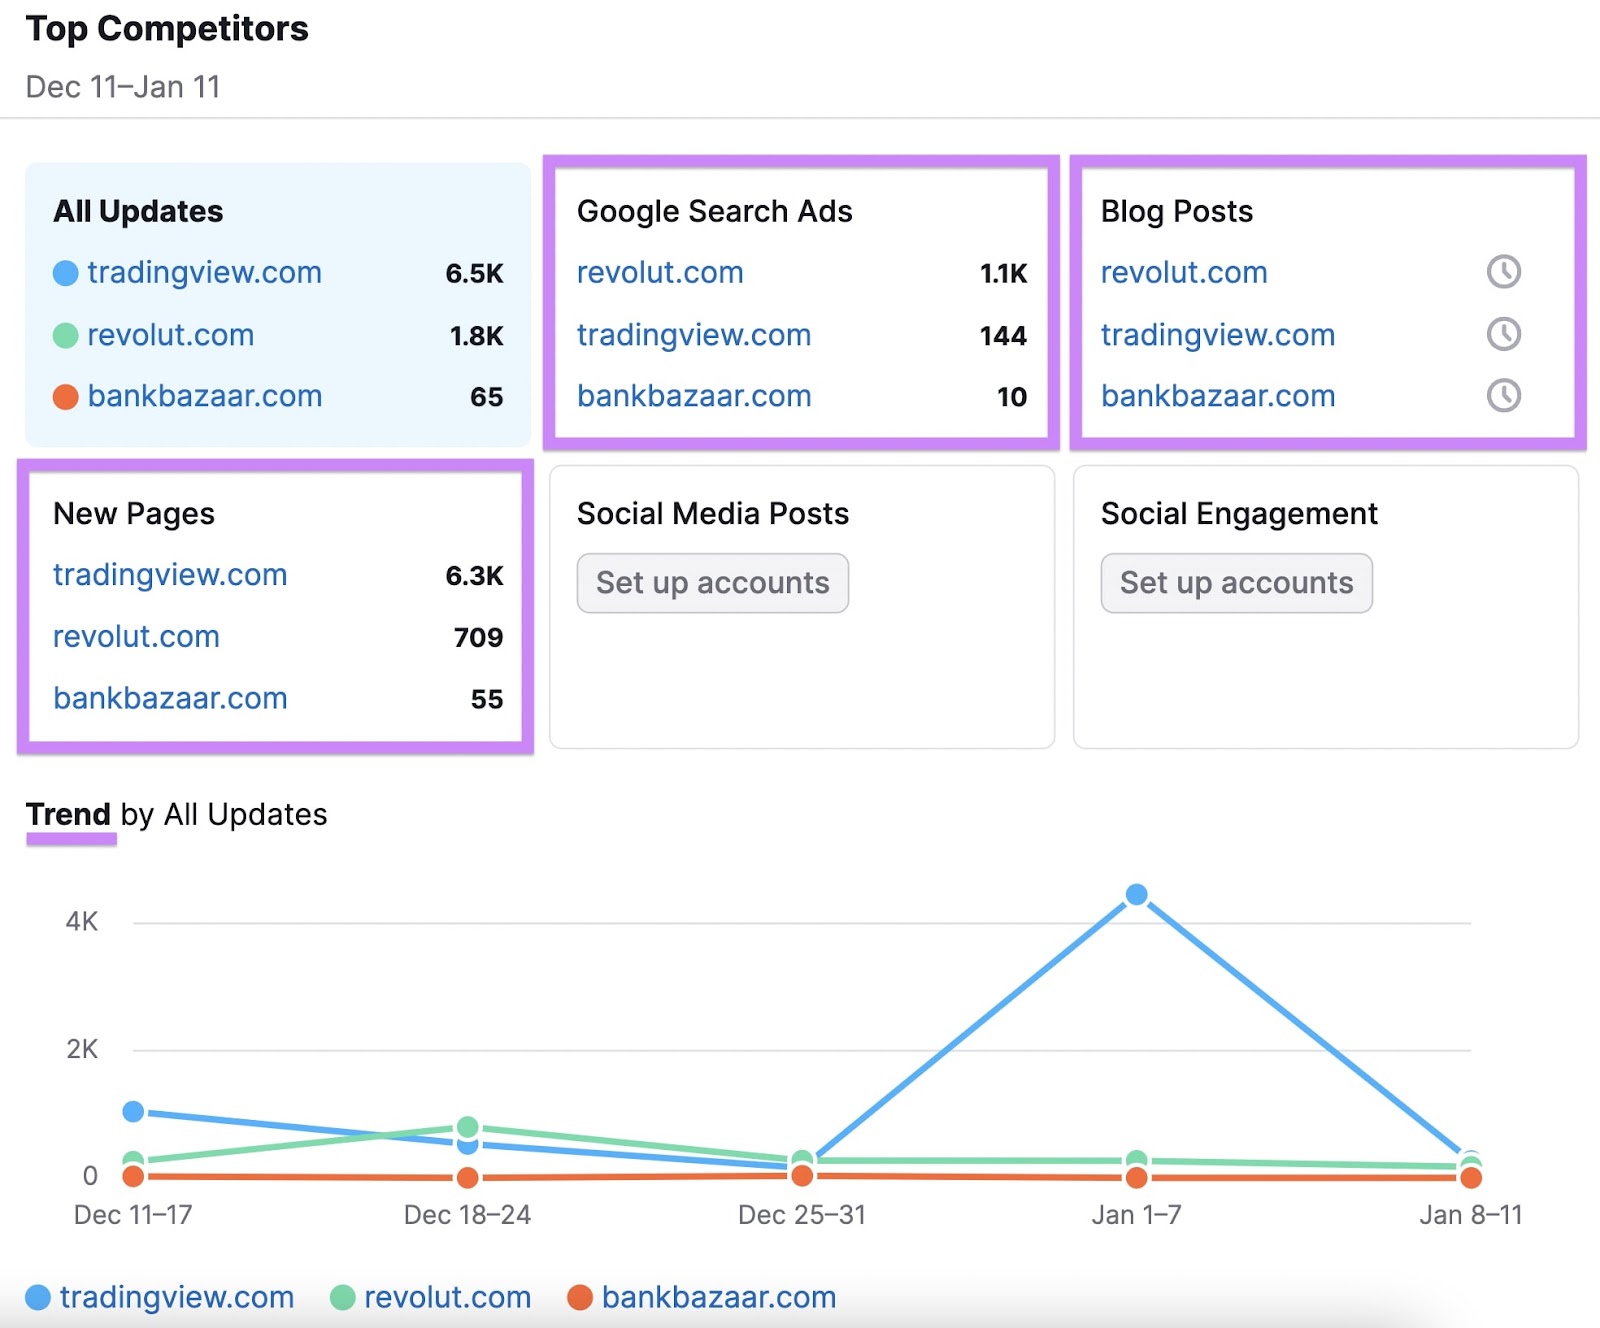 "Top Competitors" report in EyeOn tool, showing data for Google search ads, blog posts, new pages and trends